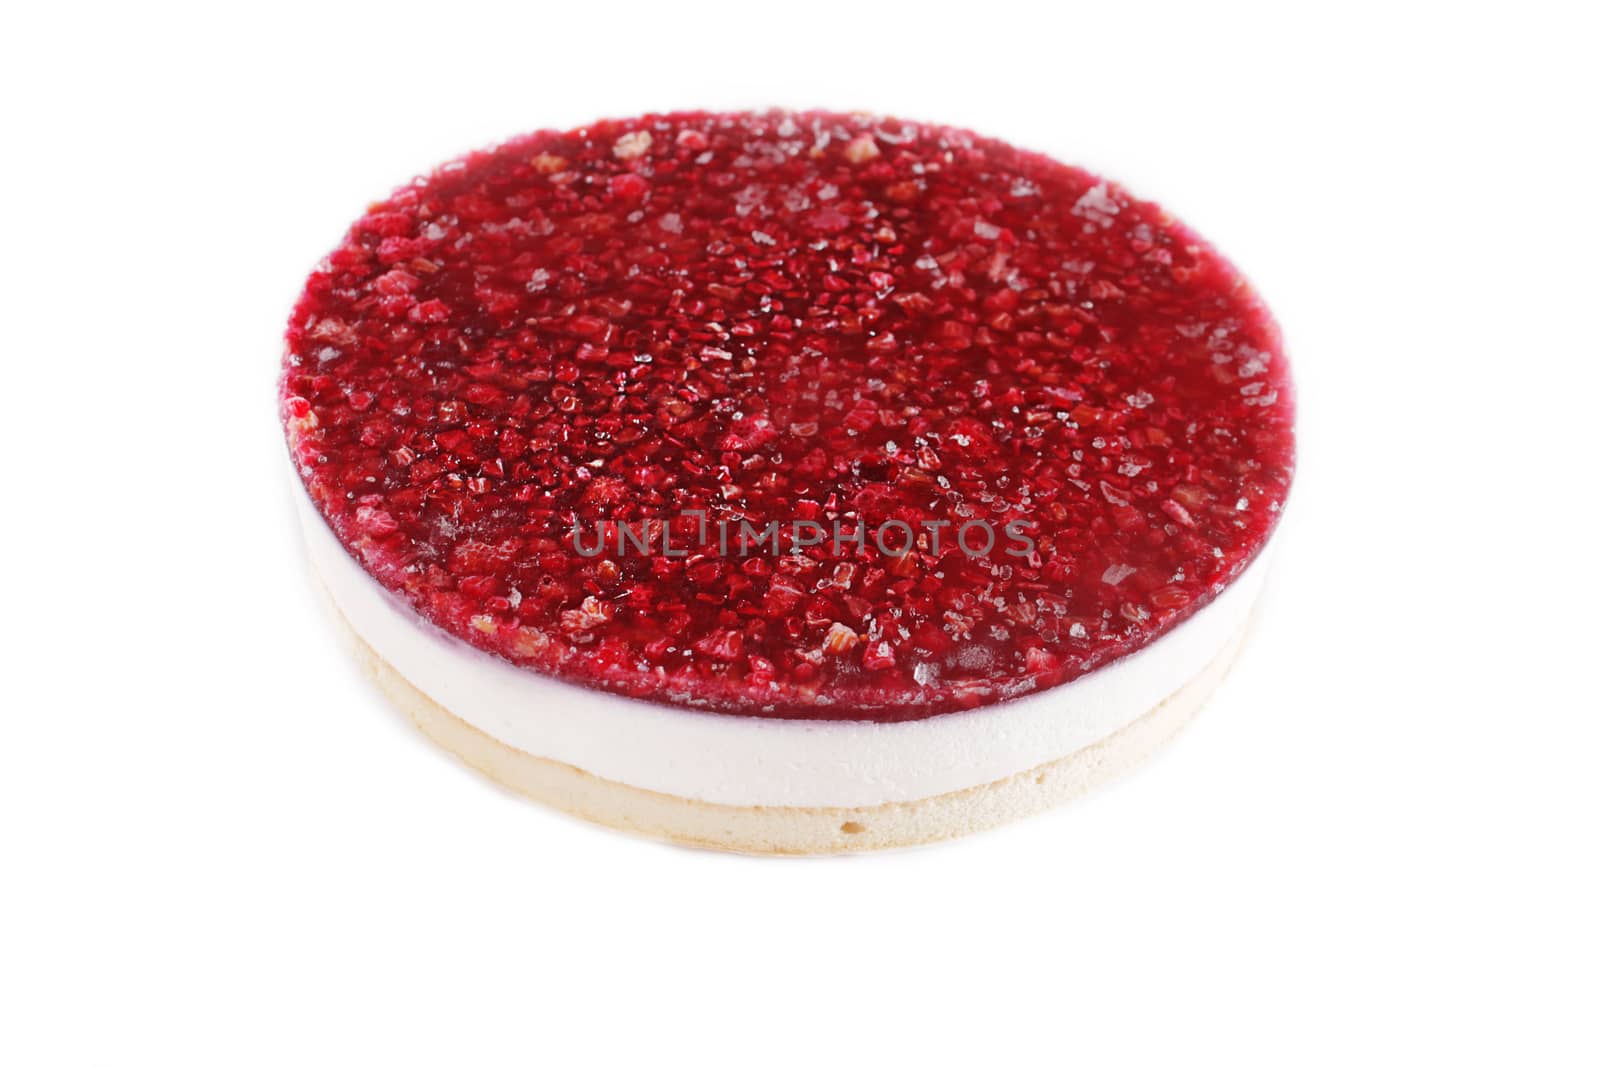 Cheesecake with raspberry on a plate over white